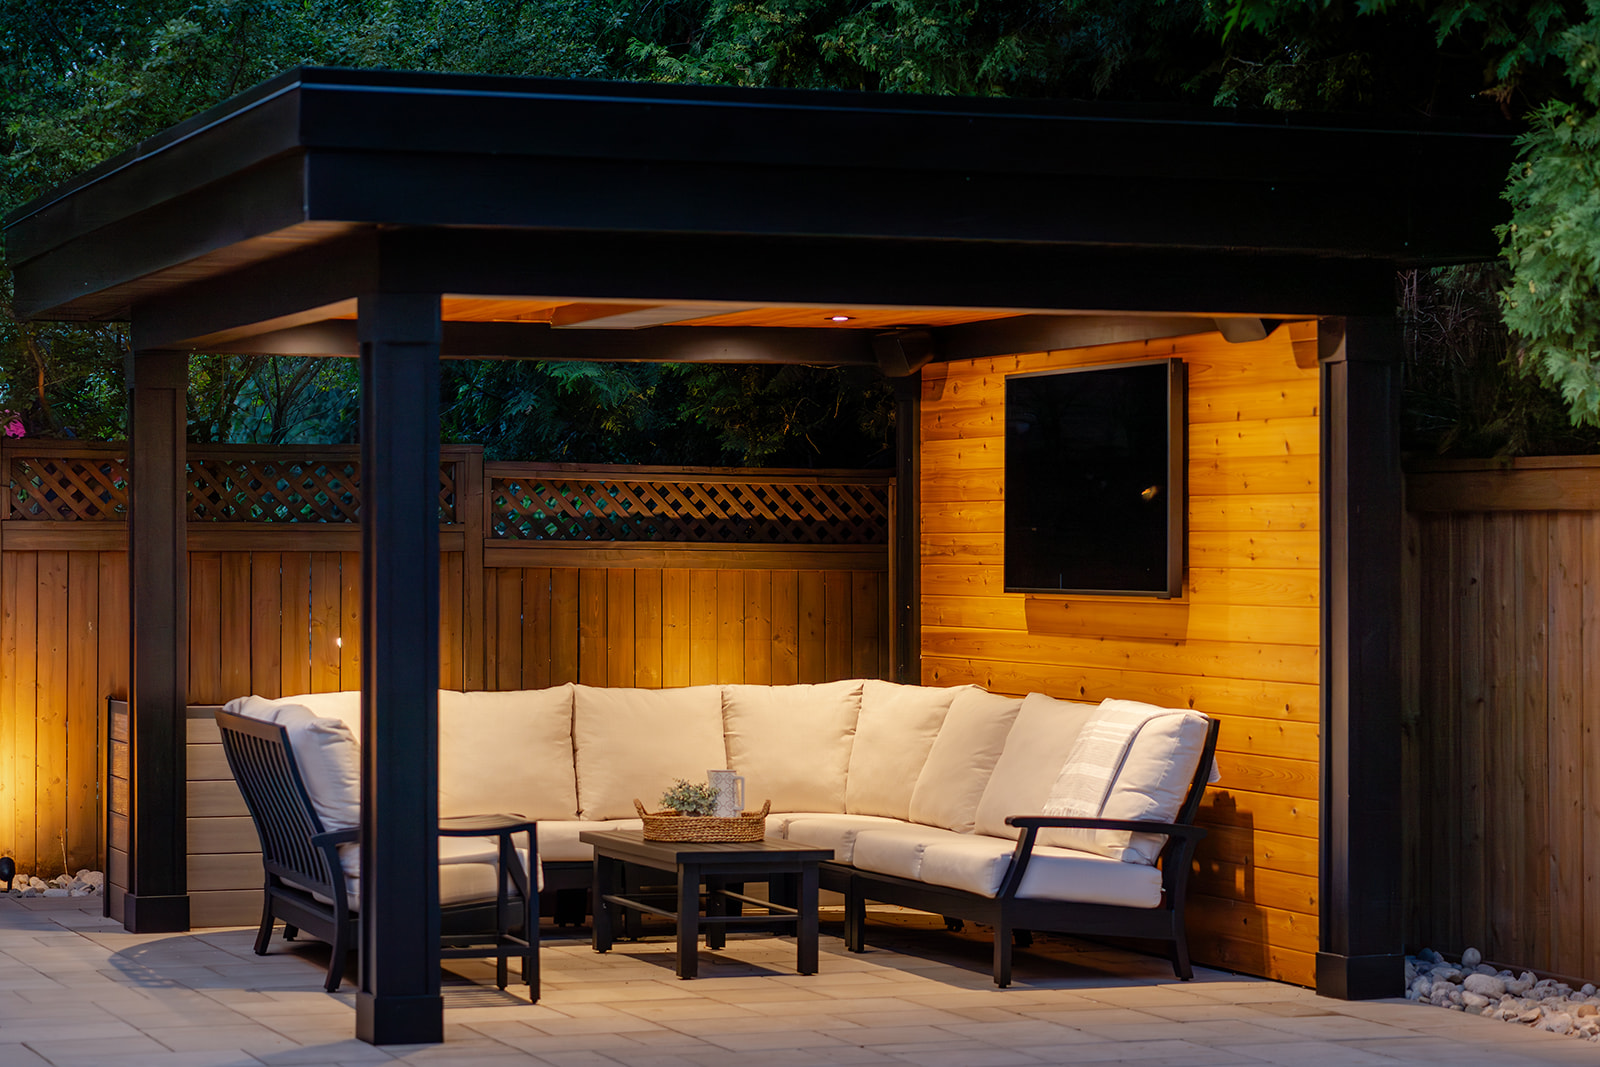 An outdoor seating area underneath a gazebo.